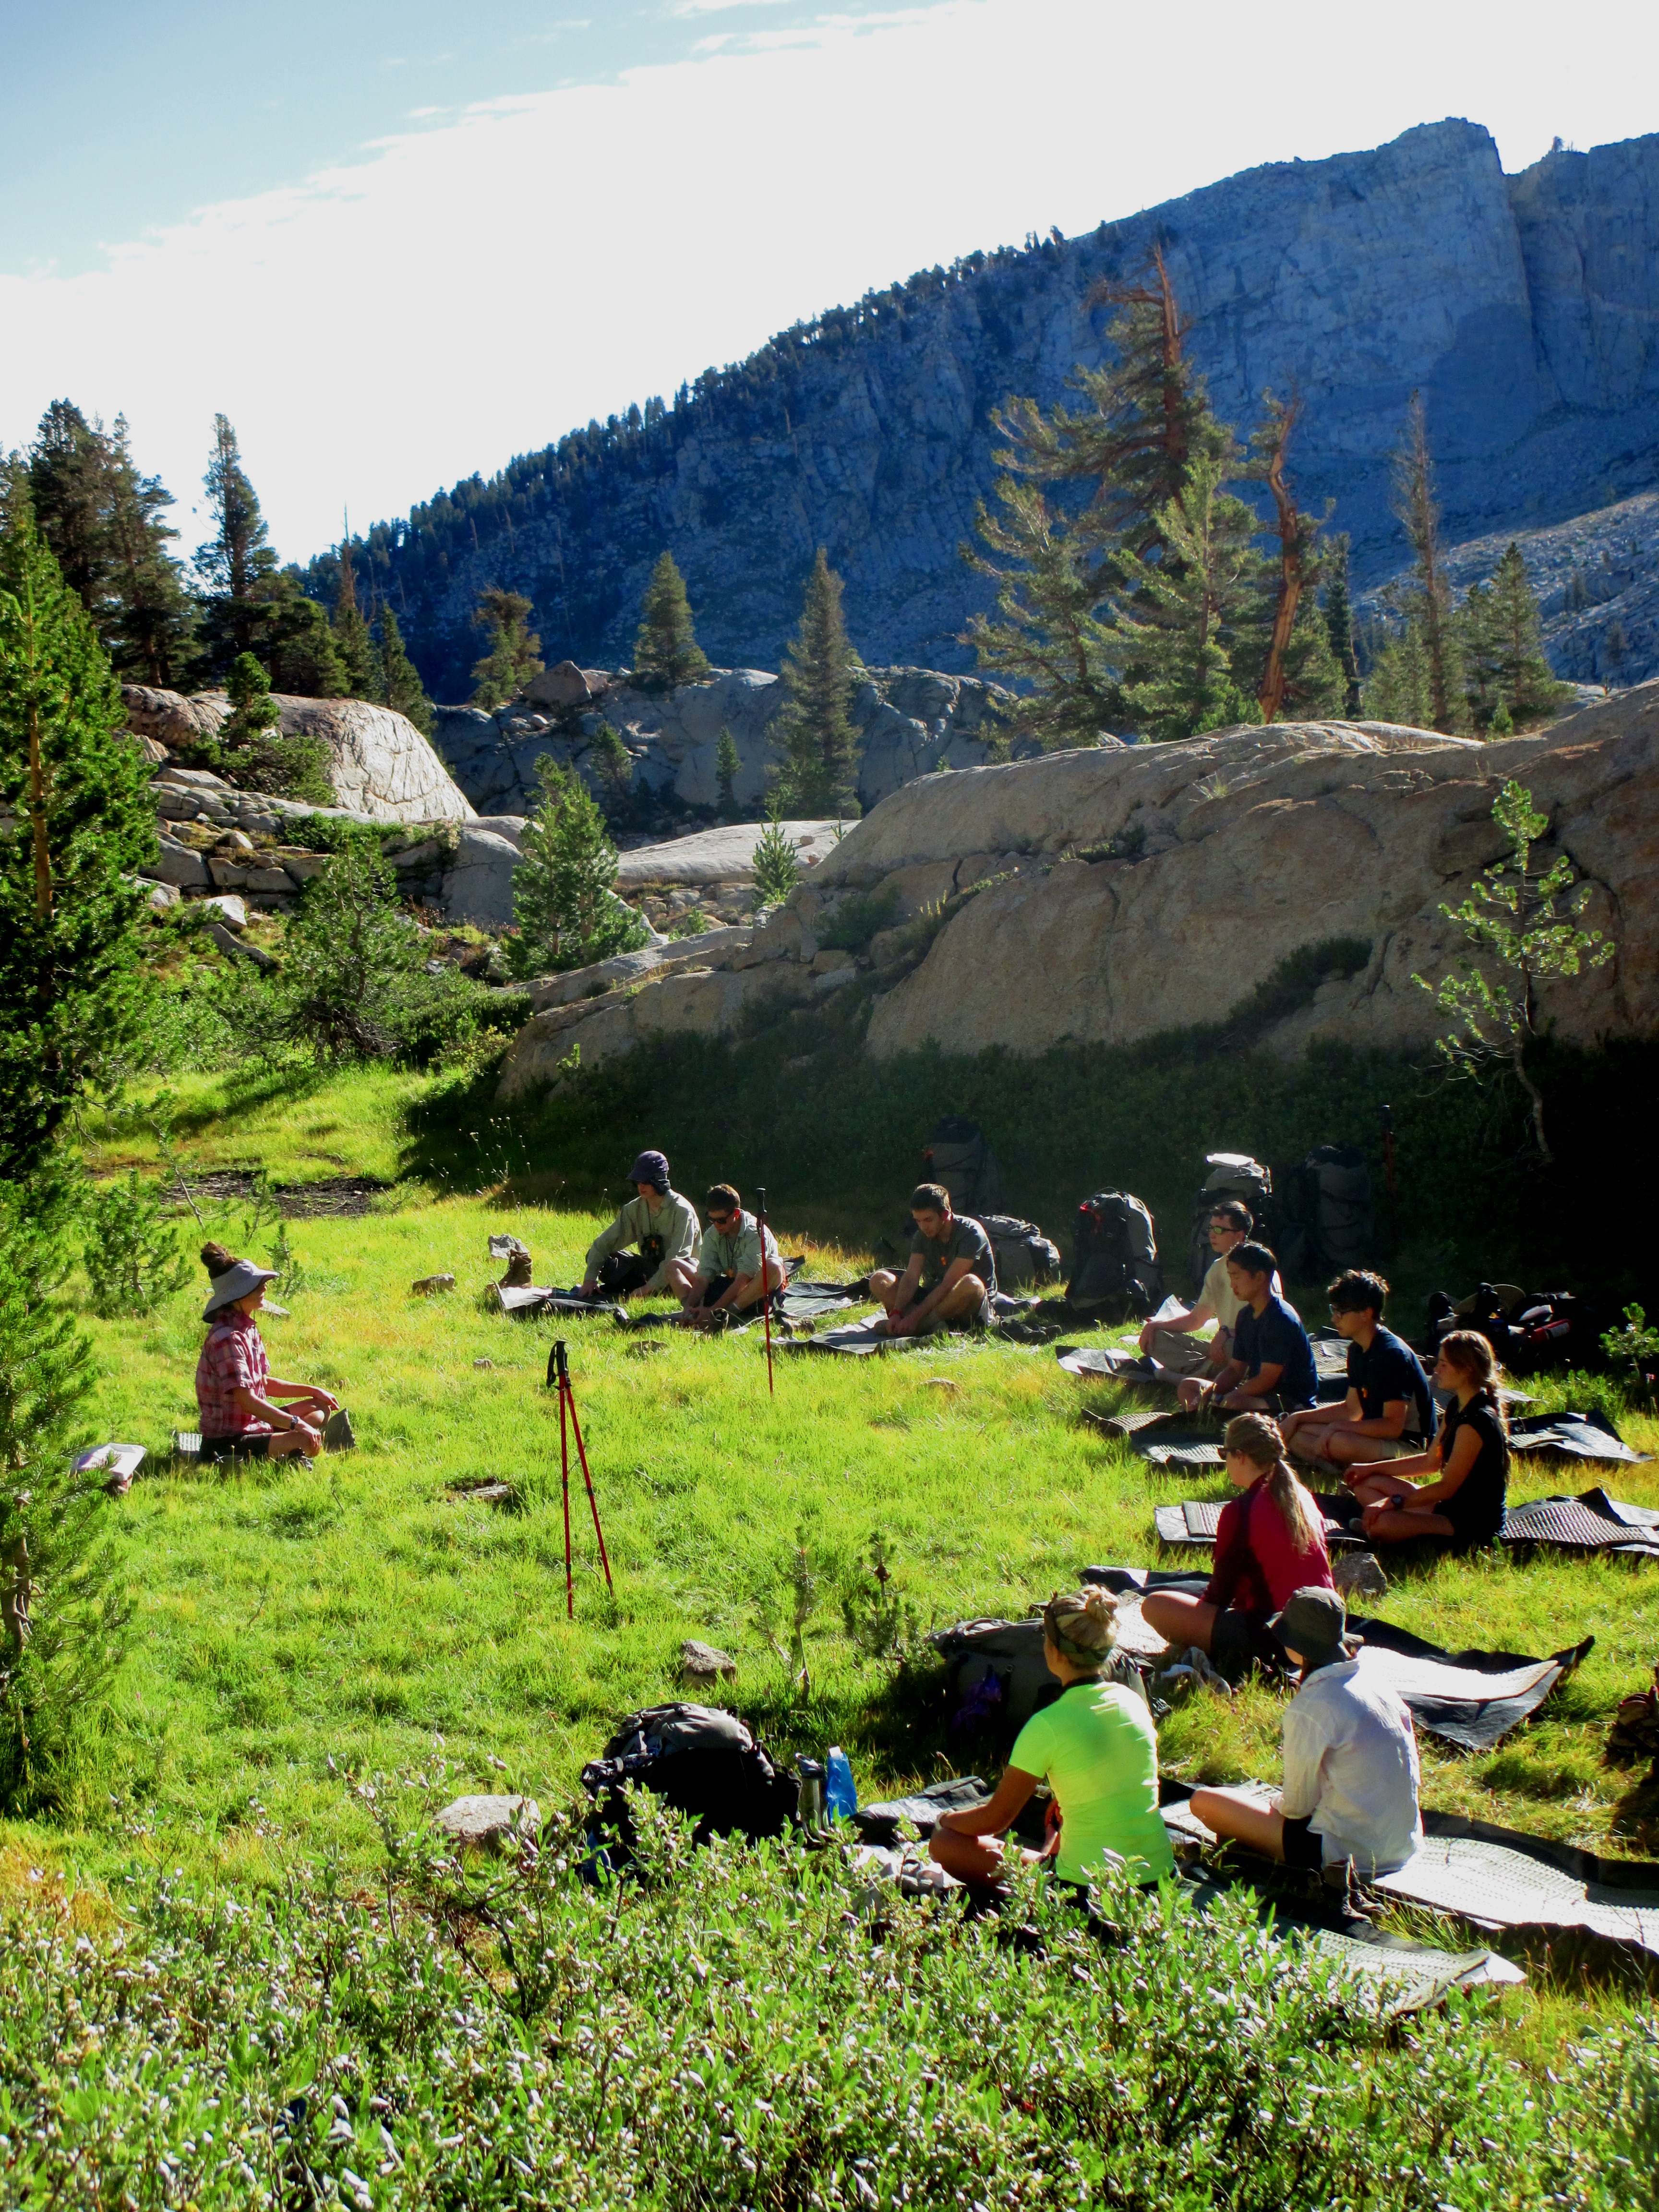 Students practice yoga on course with Outward Bound